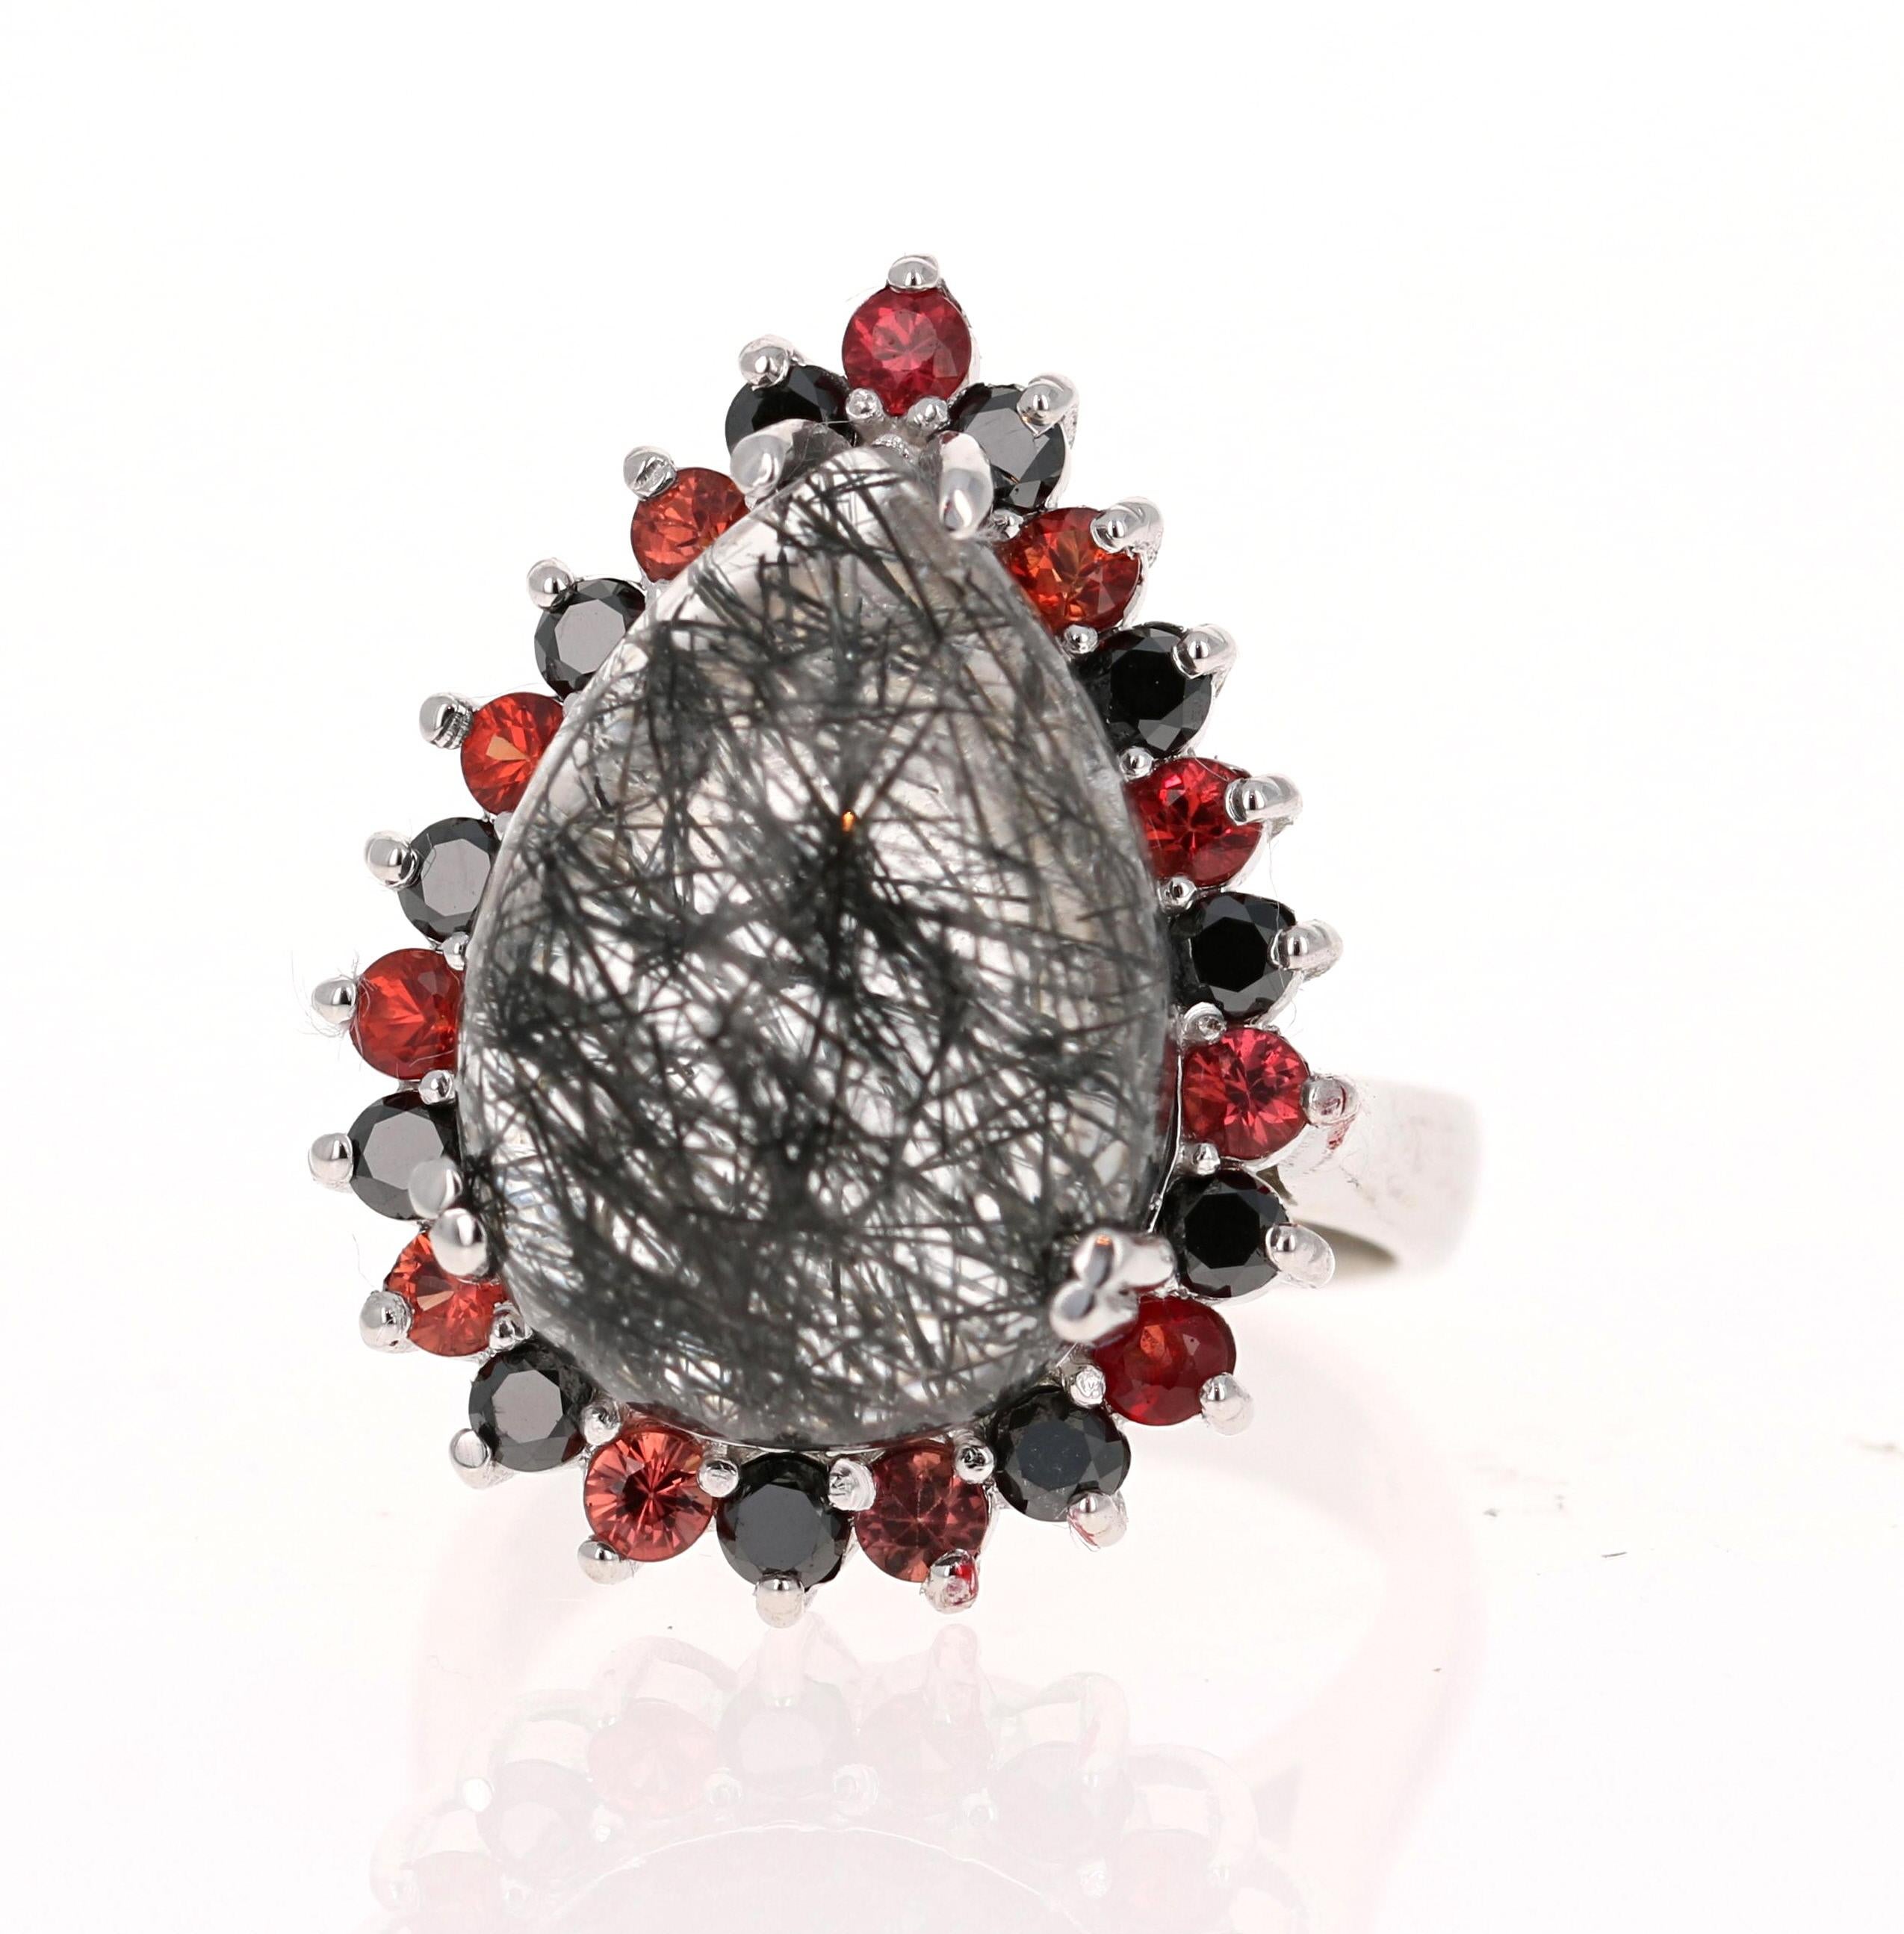 
13.03 Carat Black Diamond, Black Rutilated Quartz and Sapphire White Gold Cocktail Ring  

An 11.44 Carat Pear Cut Black Rutilated Quartz sits in the center of the ring and is surrounded by alternating Black Round Cut Diamonds and Red Round Cut